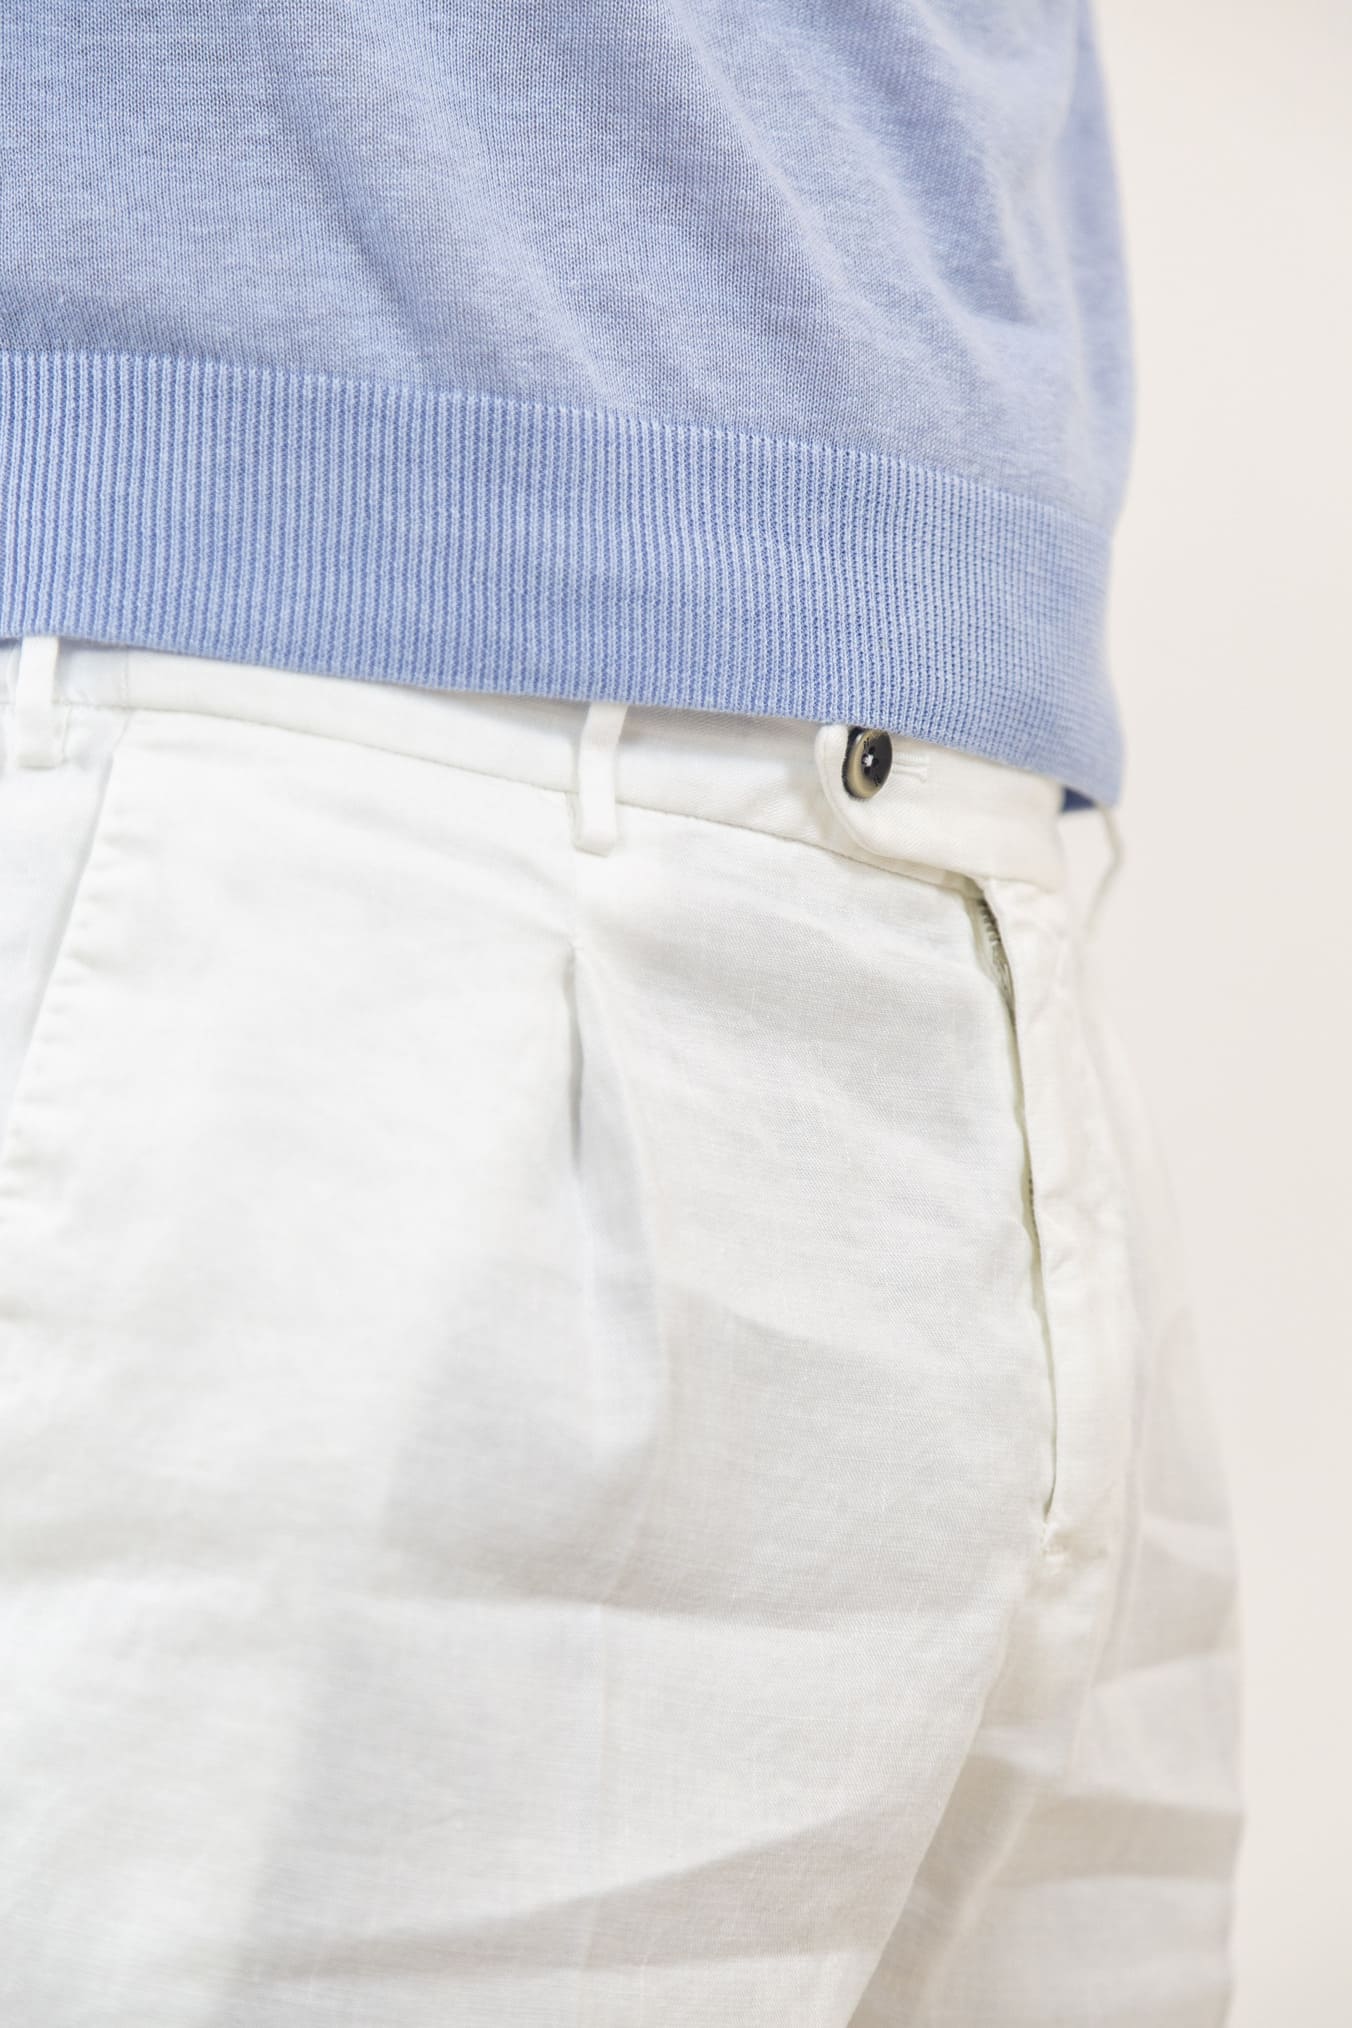 PT Bermuda shorts with pleats and removable drawstring in white linen and cotton